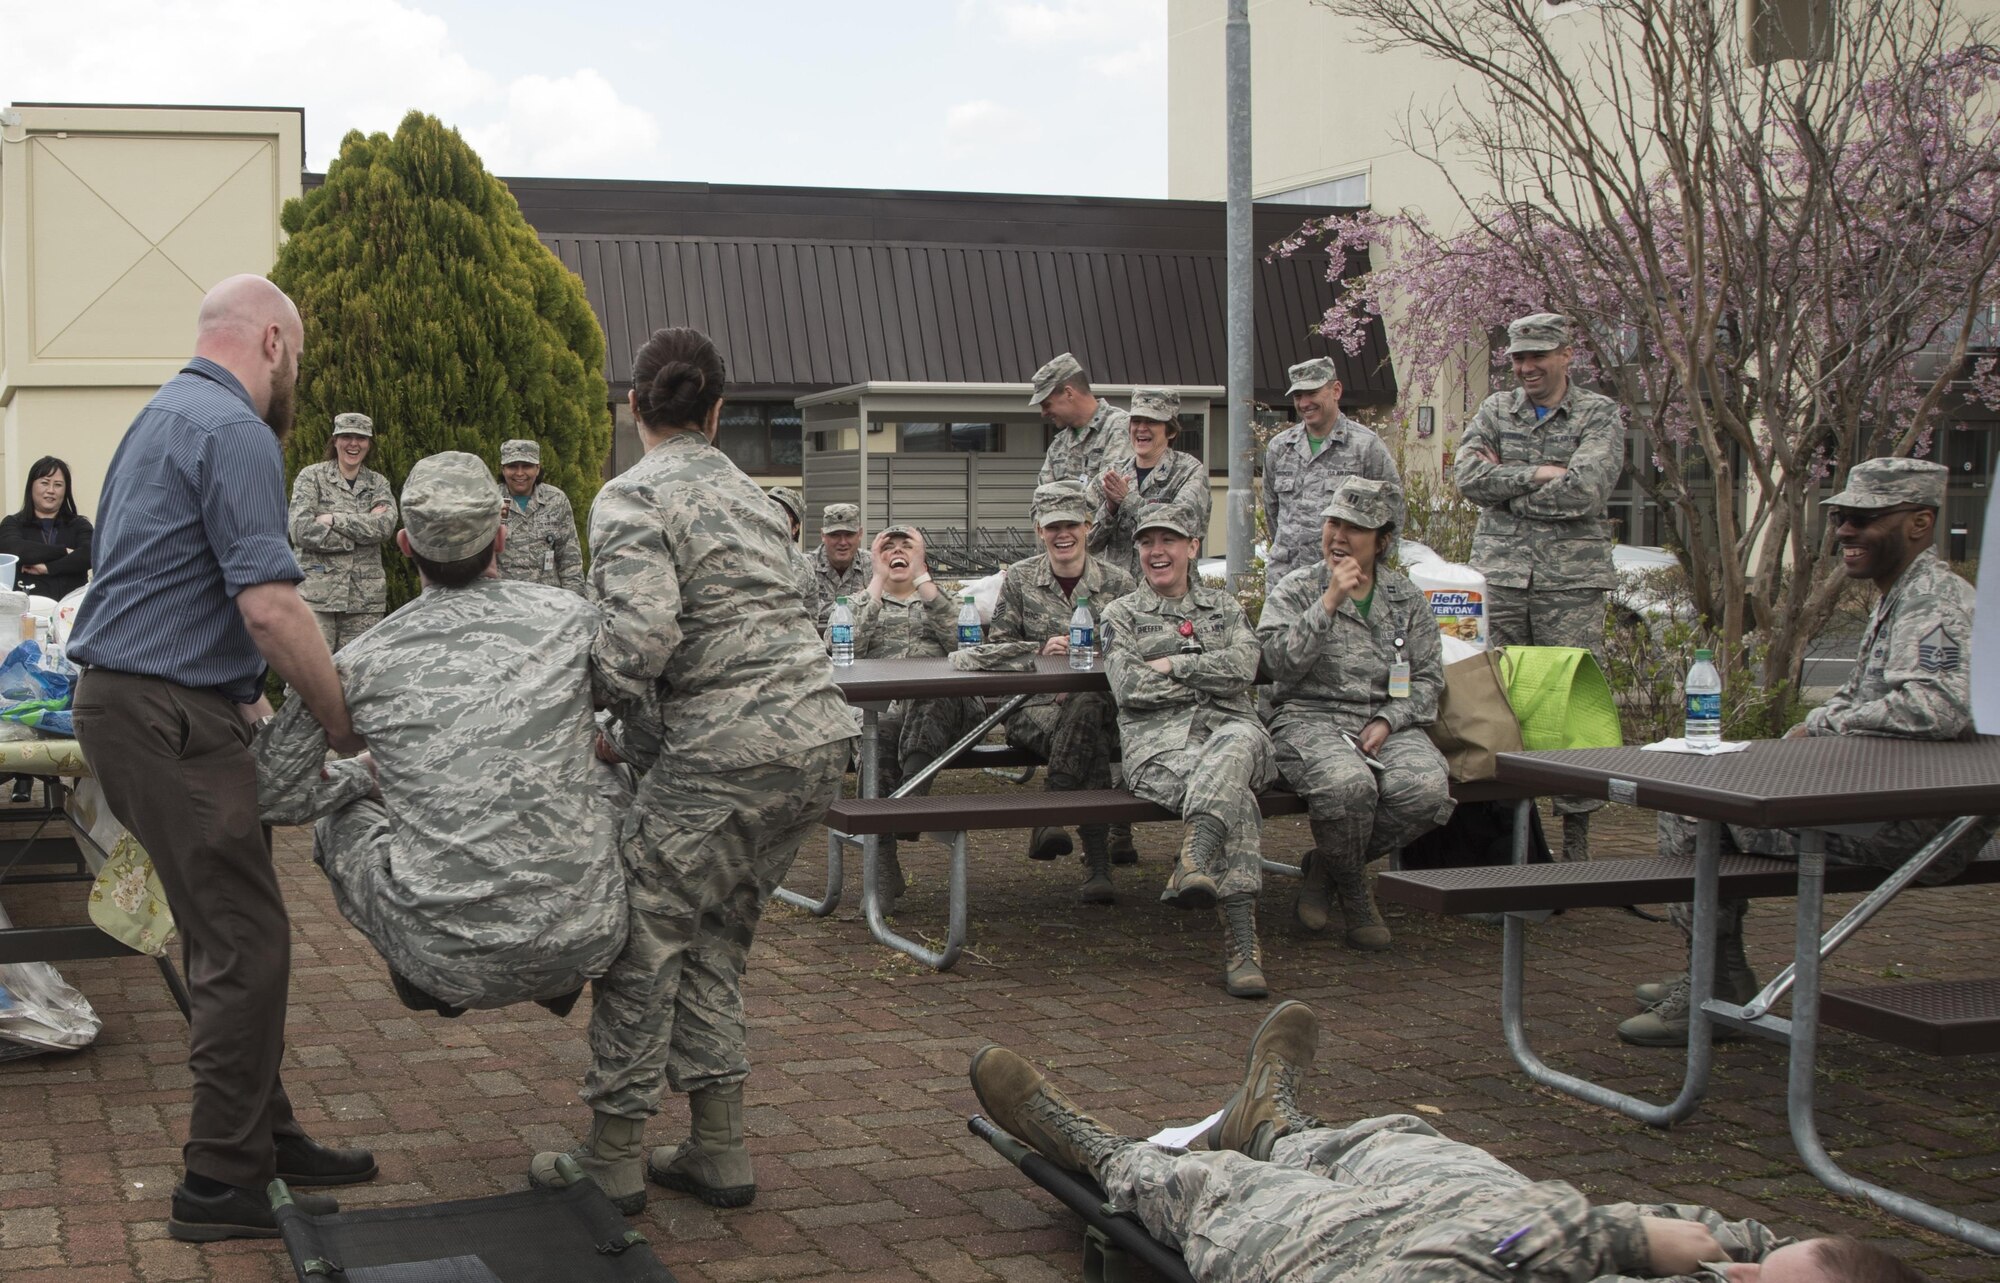 Members of the 35th Medical Group laugh during the performance of a comical skit about the importance of patient safety at Misawa Air Base, Japan, April 28, 2017. This year’s theme, United for Patient Safety, highlighted the national education and awareness-building campaign which caters to improving patient safety in the United States military and civilian hospitals. (U.S. Air Force photo by Staff Sgt. Melanie A. Hutto)